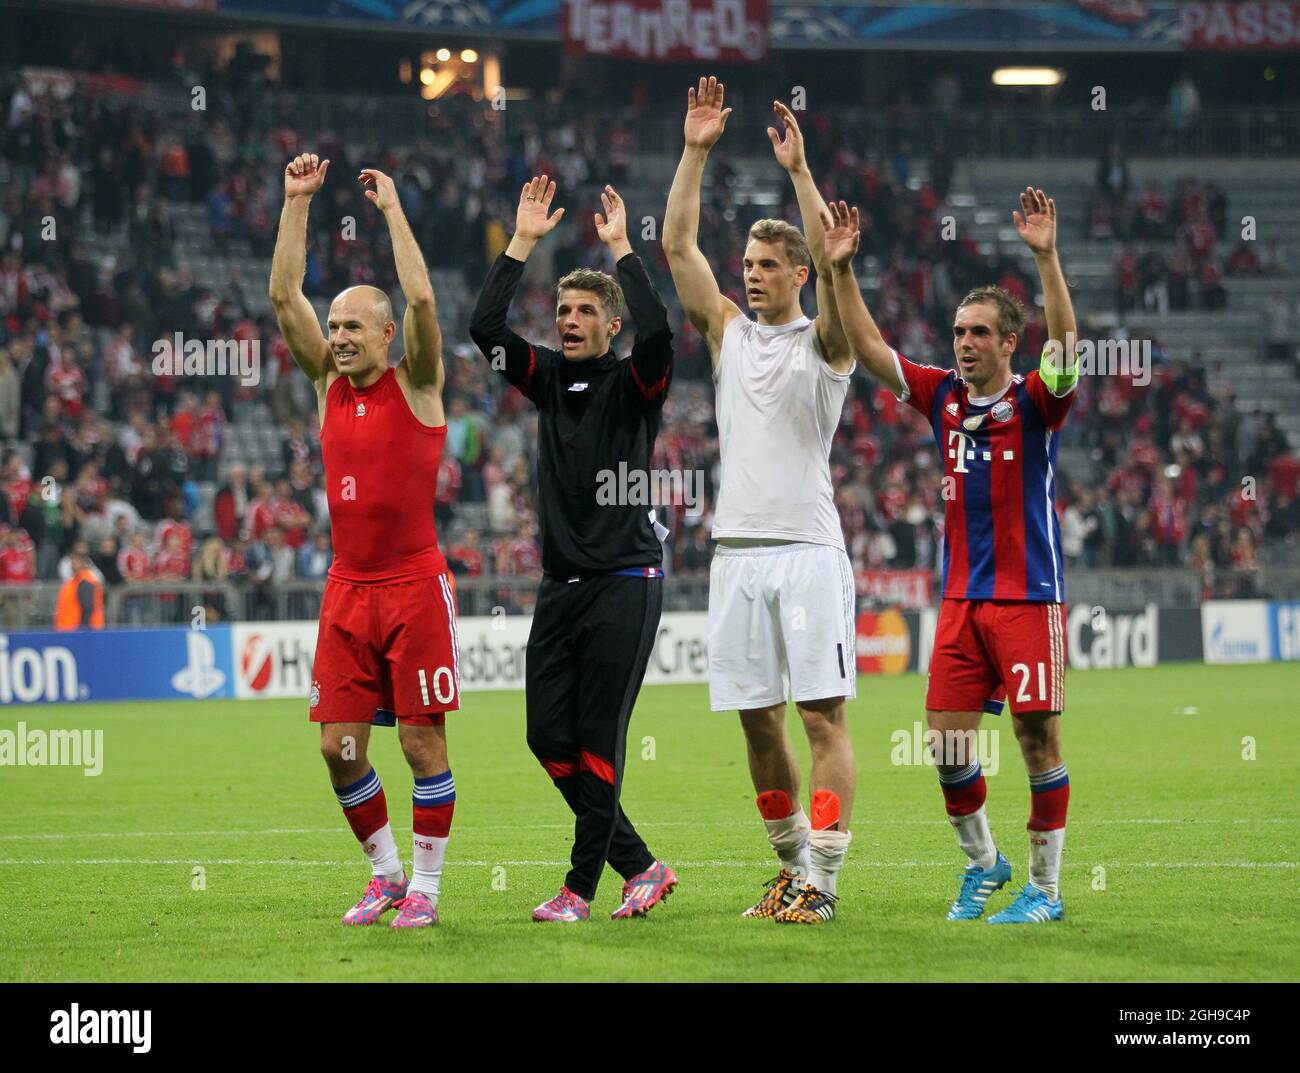 Munich's Arjen Robben, Thomas Muller, Manuel Neuer and Philipp Lahm celebrate at the final whistle during the Champions League Group E match between Bayern Munich and Manchester City held at Allianz Arena in Germany on Sept. 17, 2014 . Stock Photo